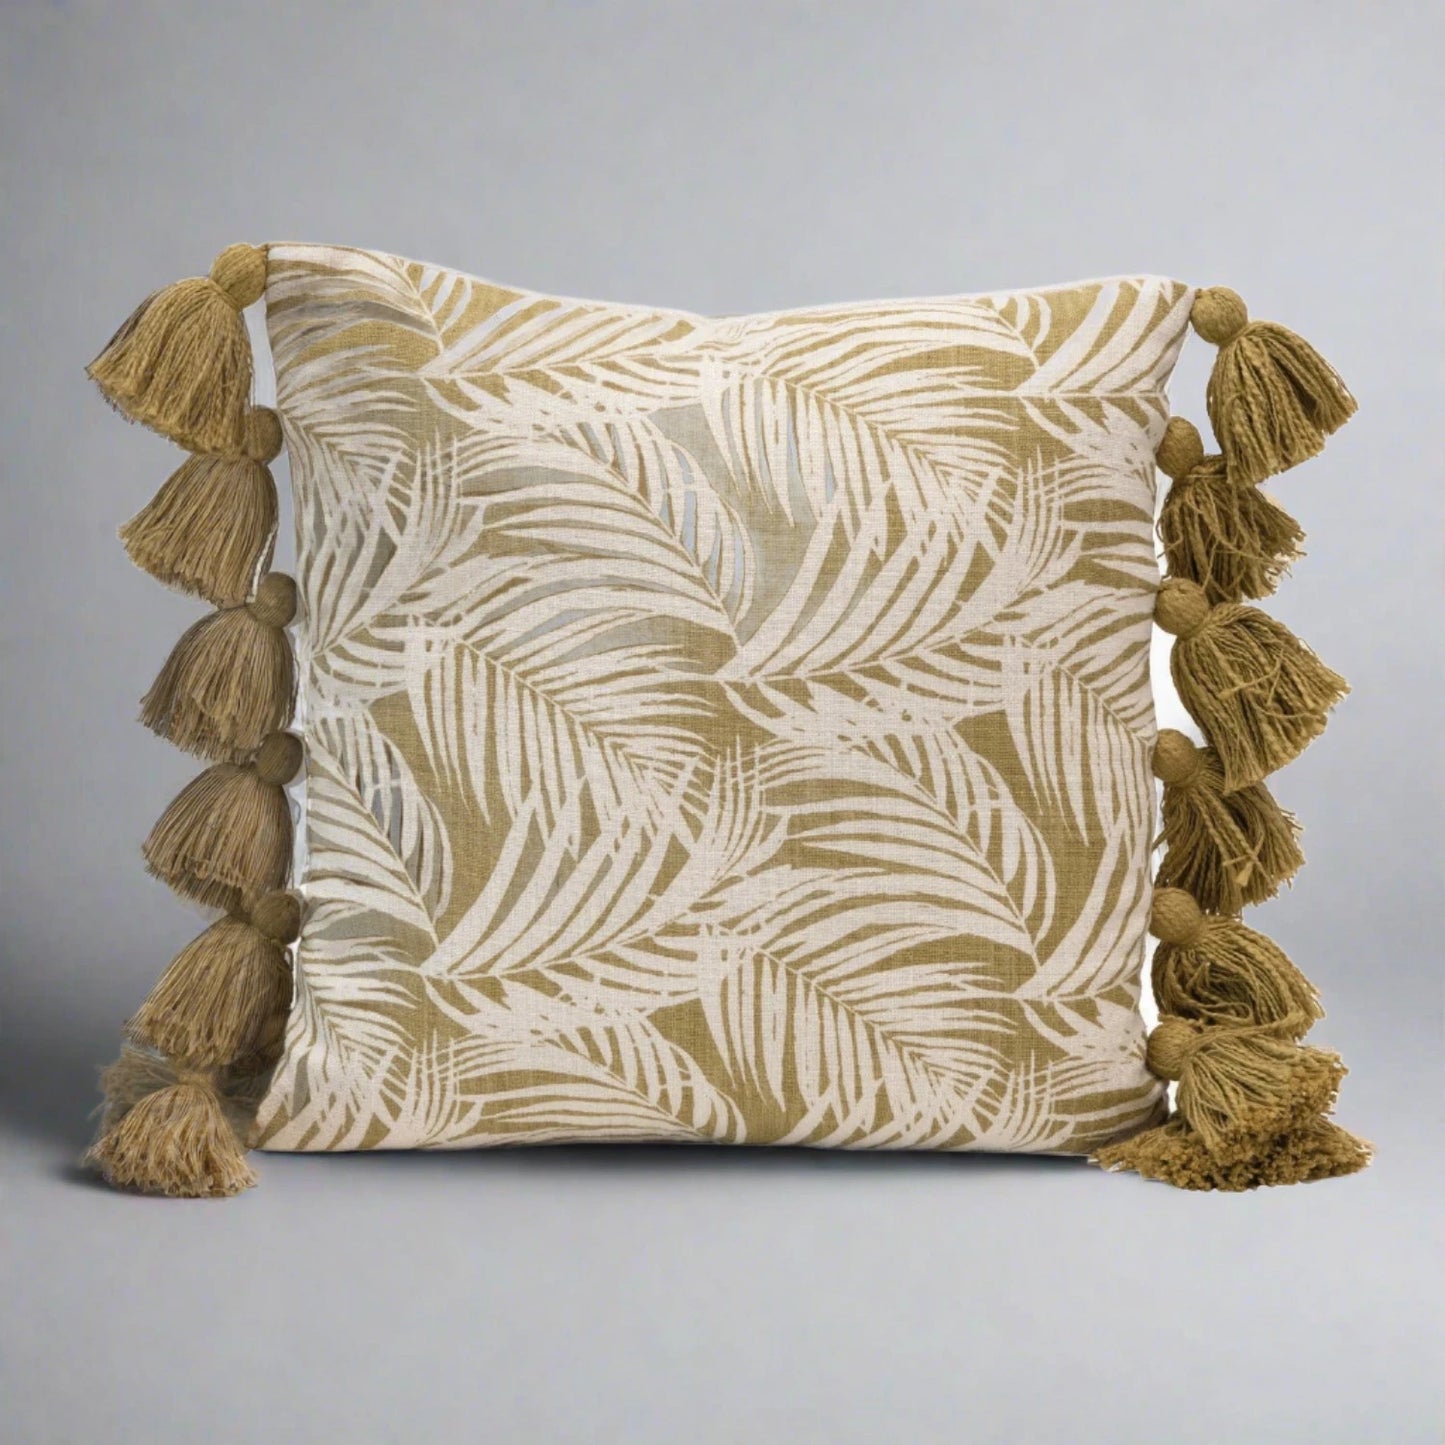 18" Cotton Pillow with Palm Frond Pattern & Tassels